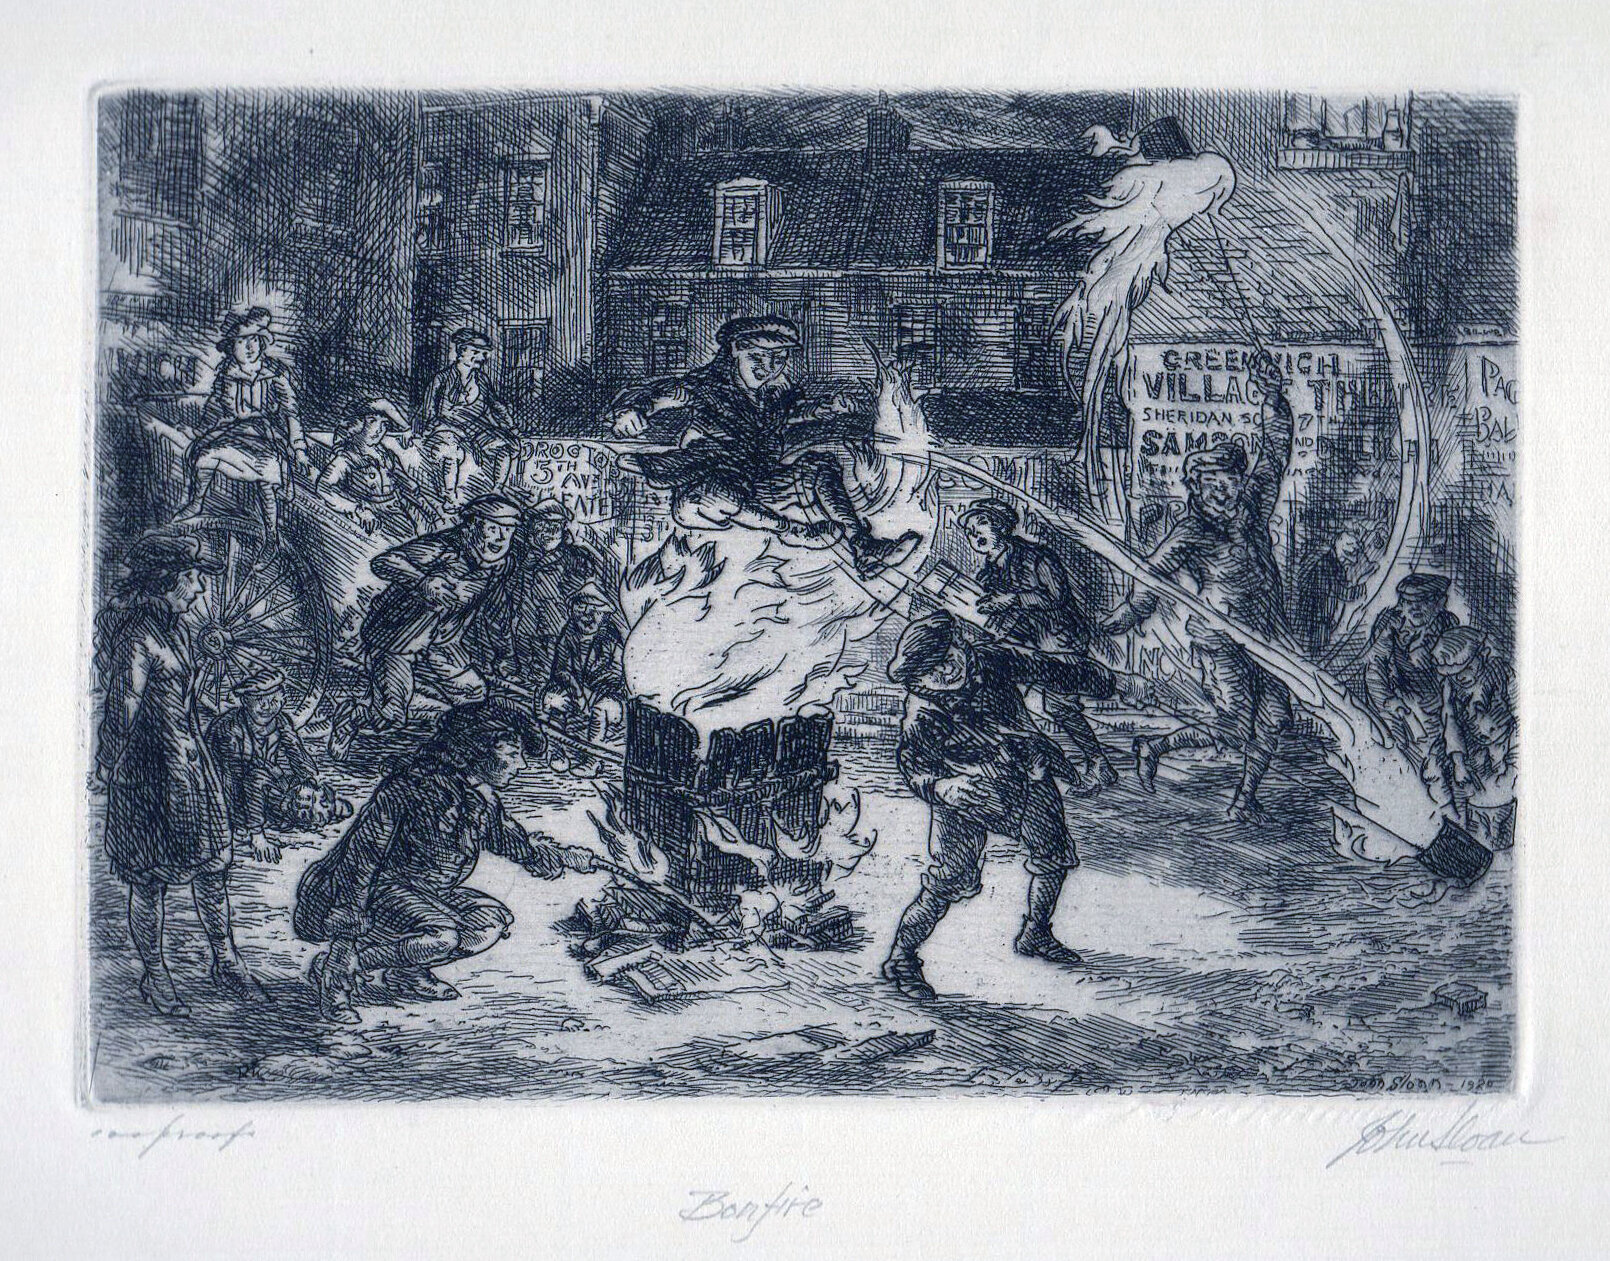 Etching of people around bonfire, one man jumping over the flames